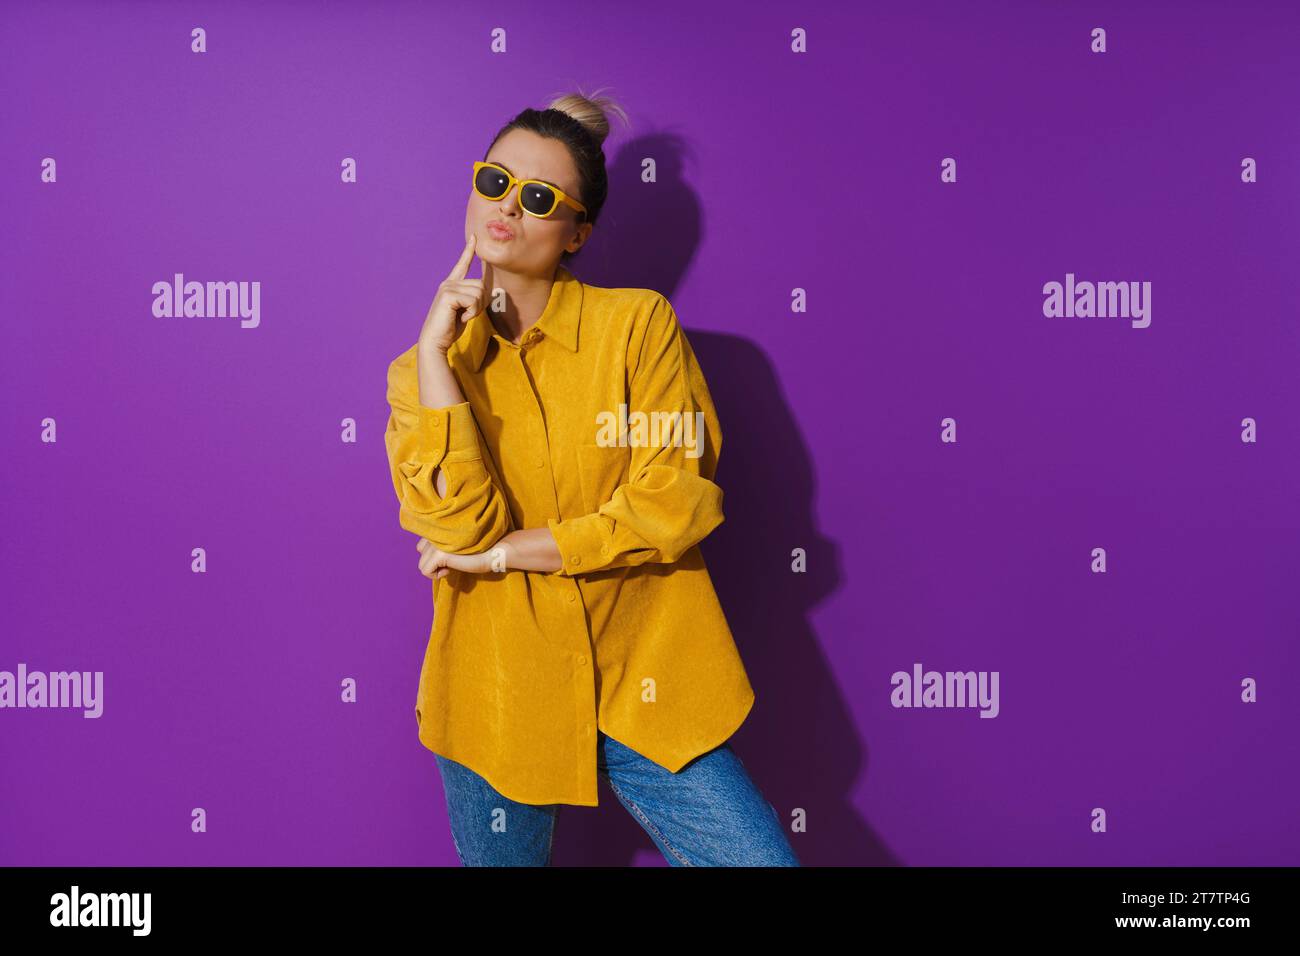 Young girl wearing yellow shirt and sunglasses showing disdain expression against purple background Stock Photo